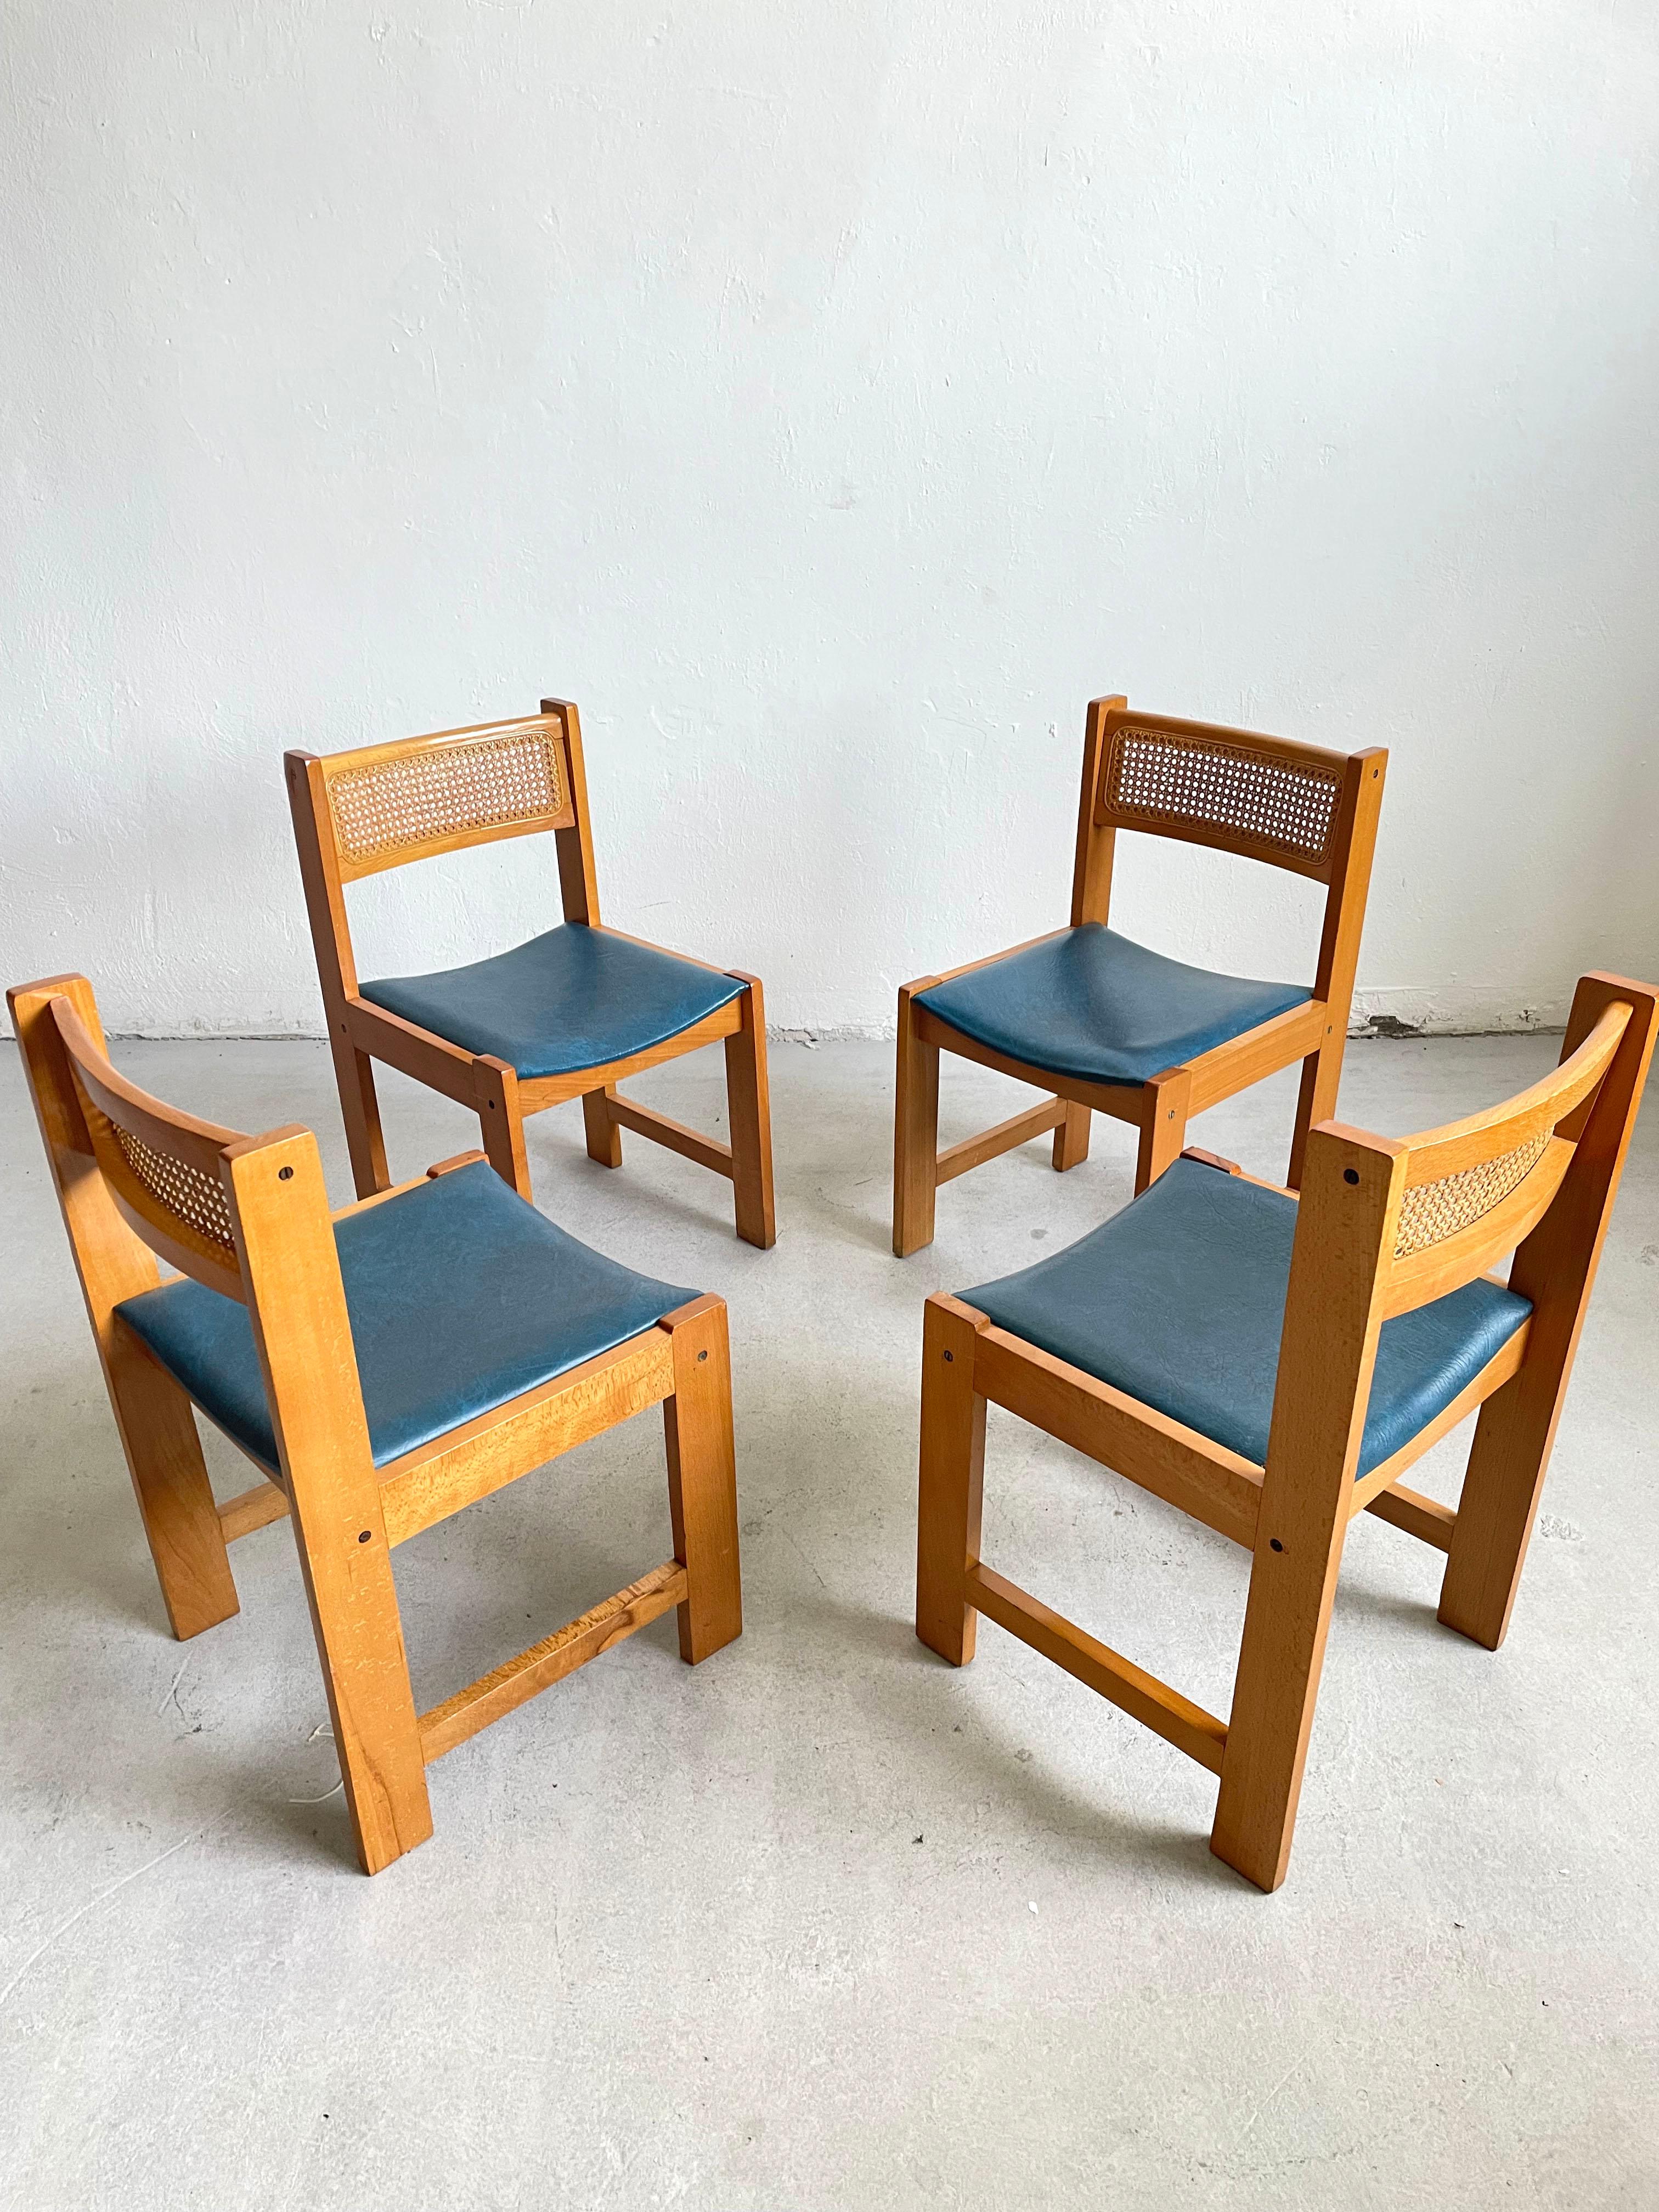 This is a set of 4 vintage dining chairs.

Beautiful vintage mid century wooden dining chair feature blue vinyl seat with dark patches and a cane backrest. They have a very simple and elegant modernist form. 

The chairs have original finish which